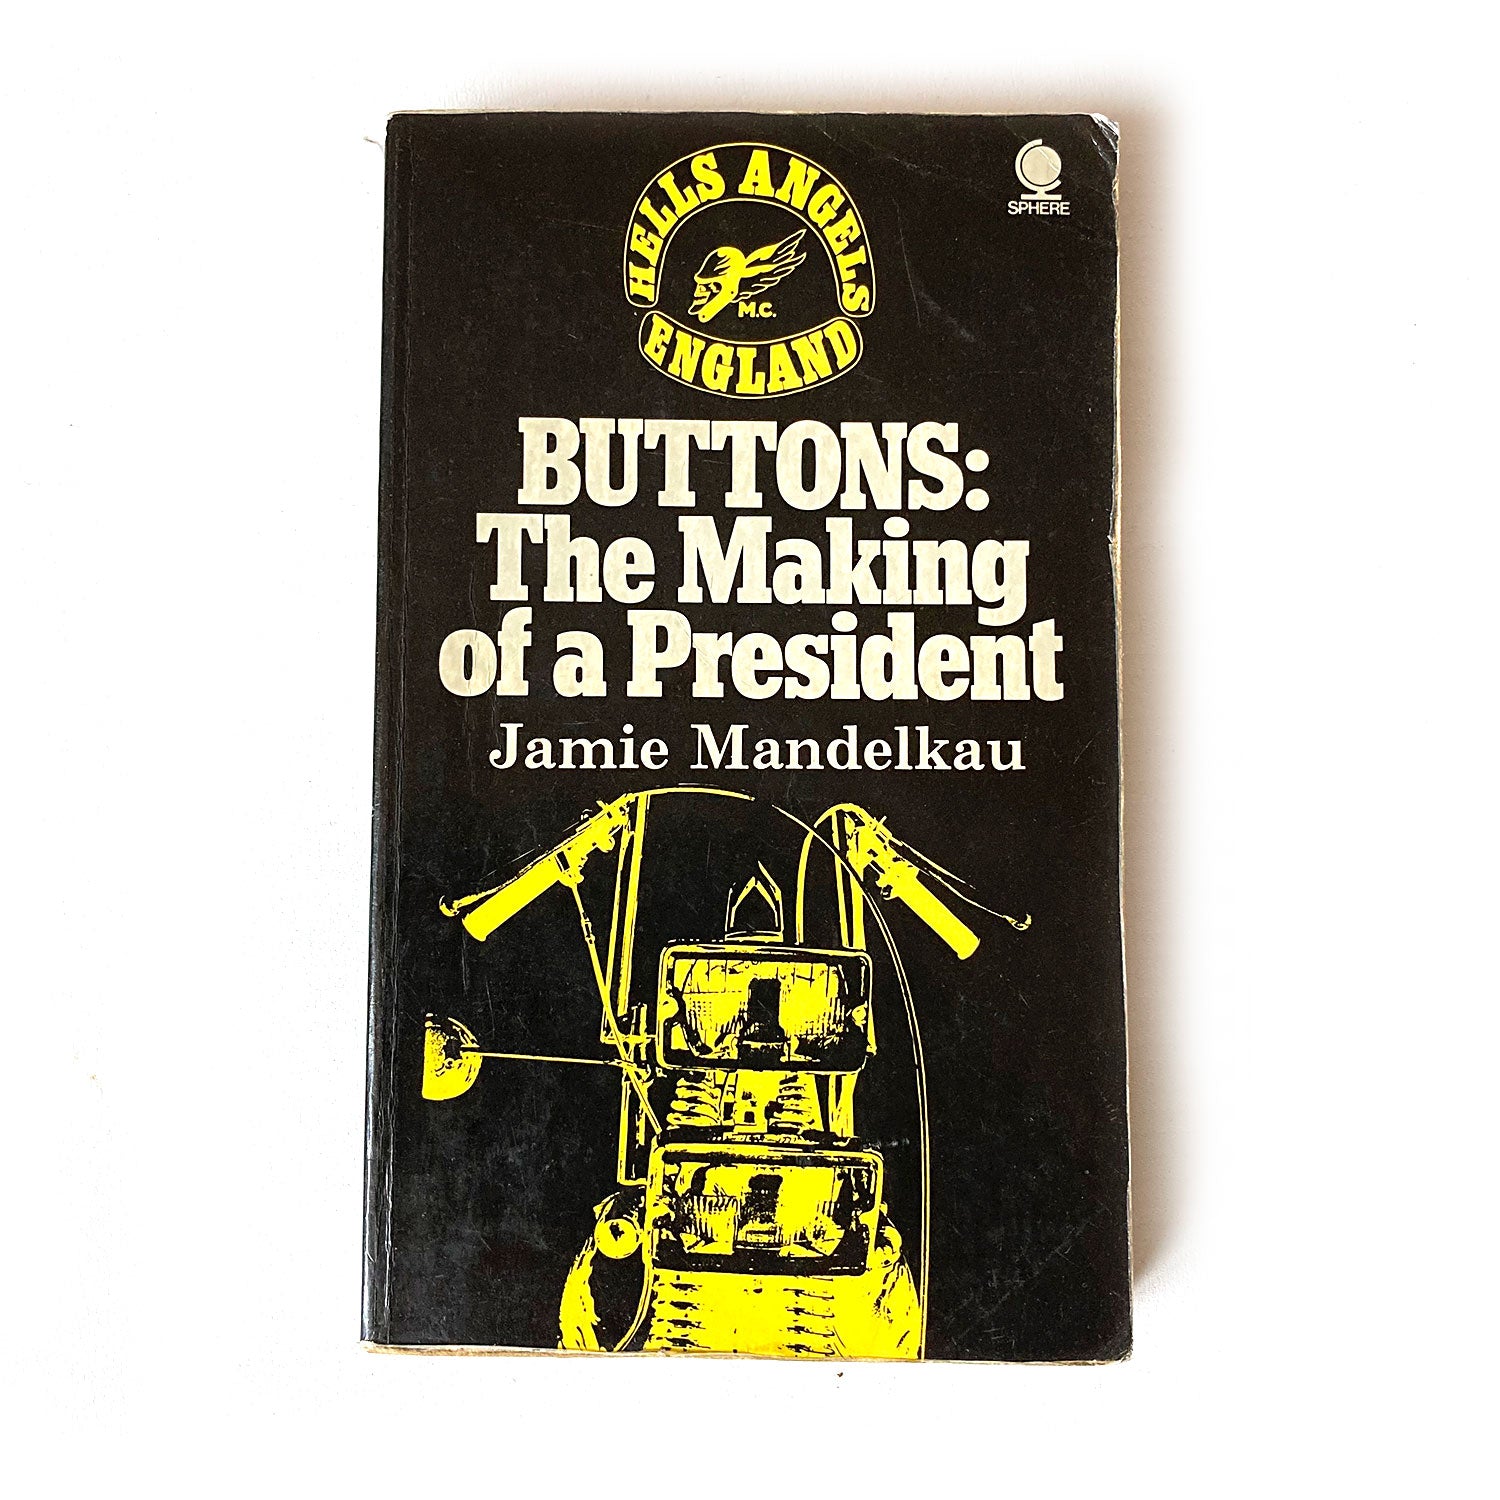 Buttons: The Making of a President by Jamie Mandelkau, First Edition Sphere paperback, 1971